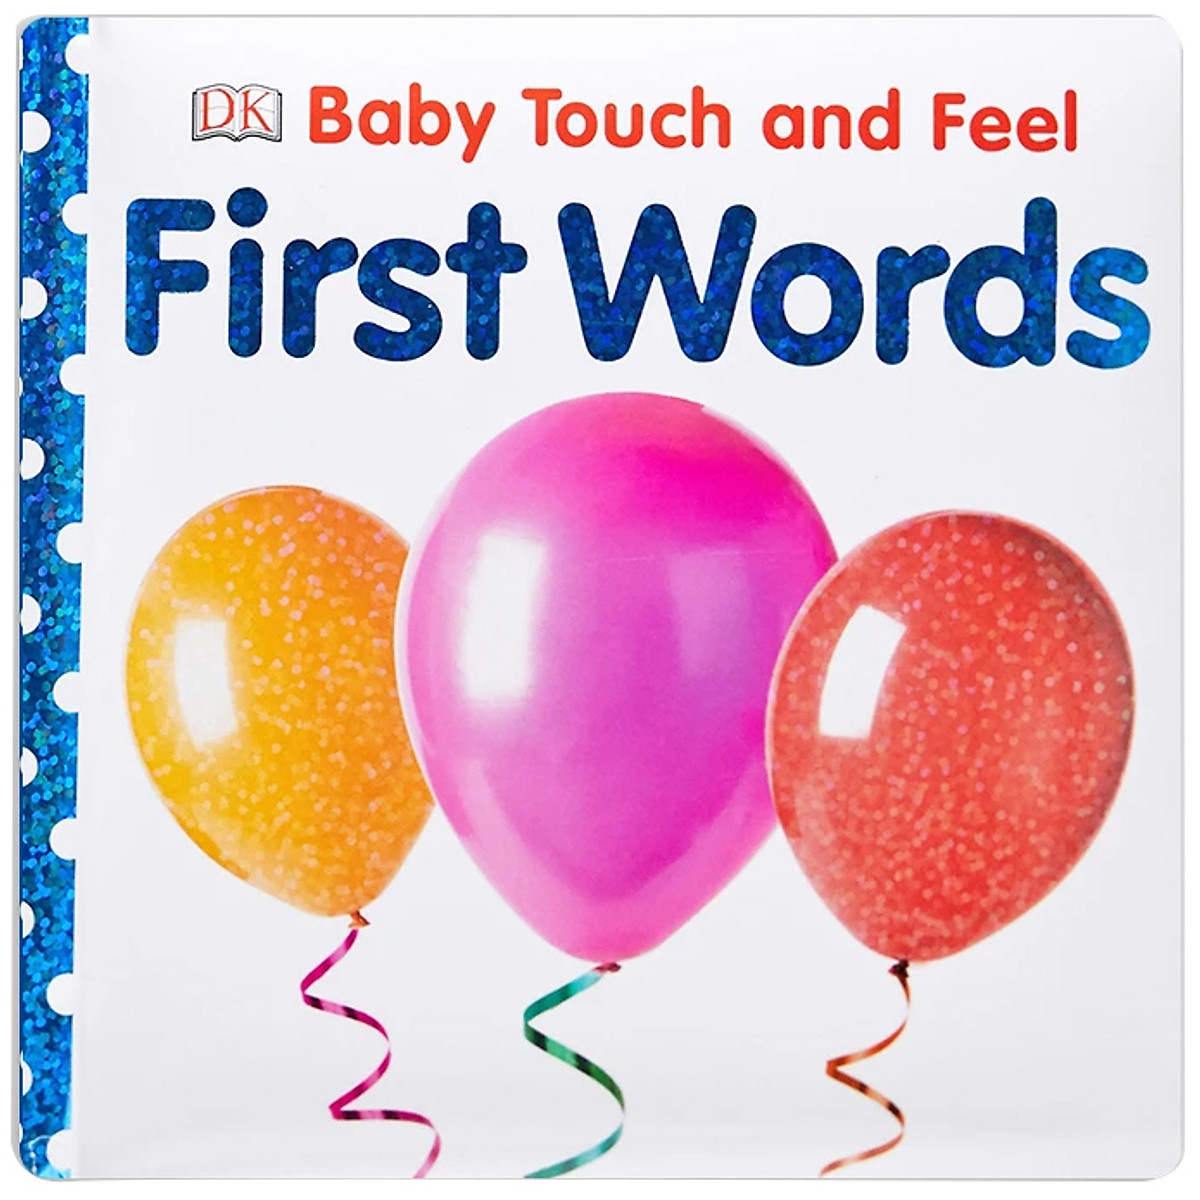 DK First Words (Series Baby Touch And Feel)